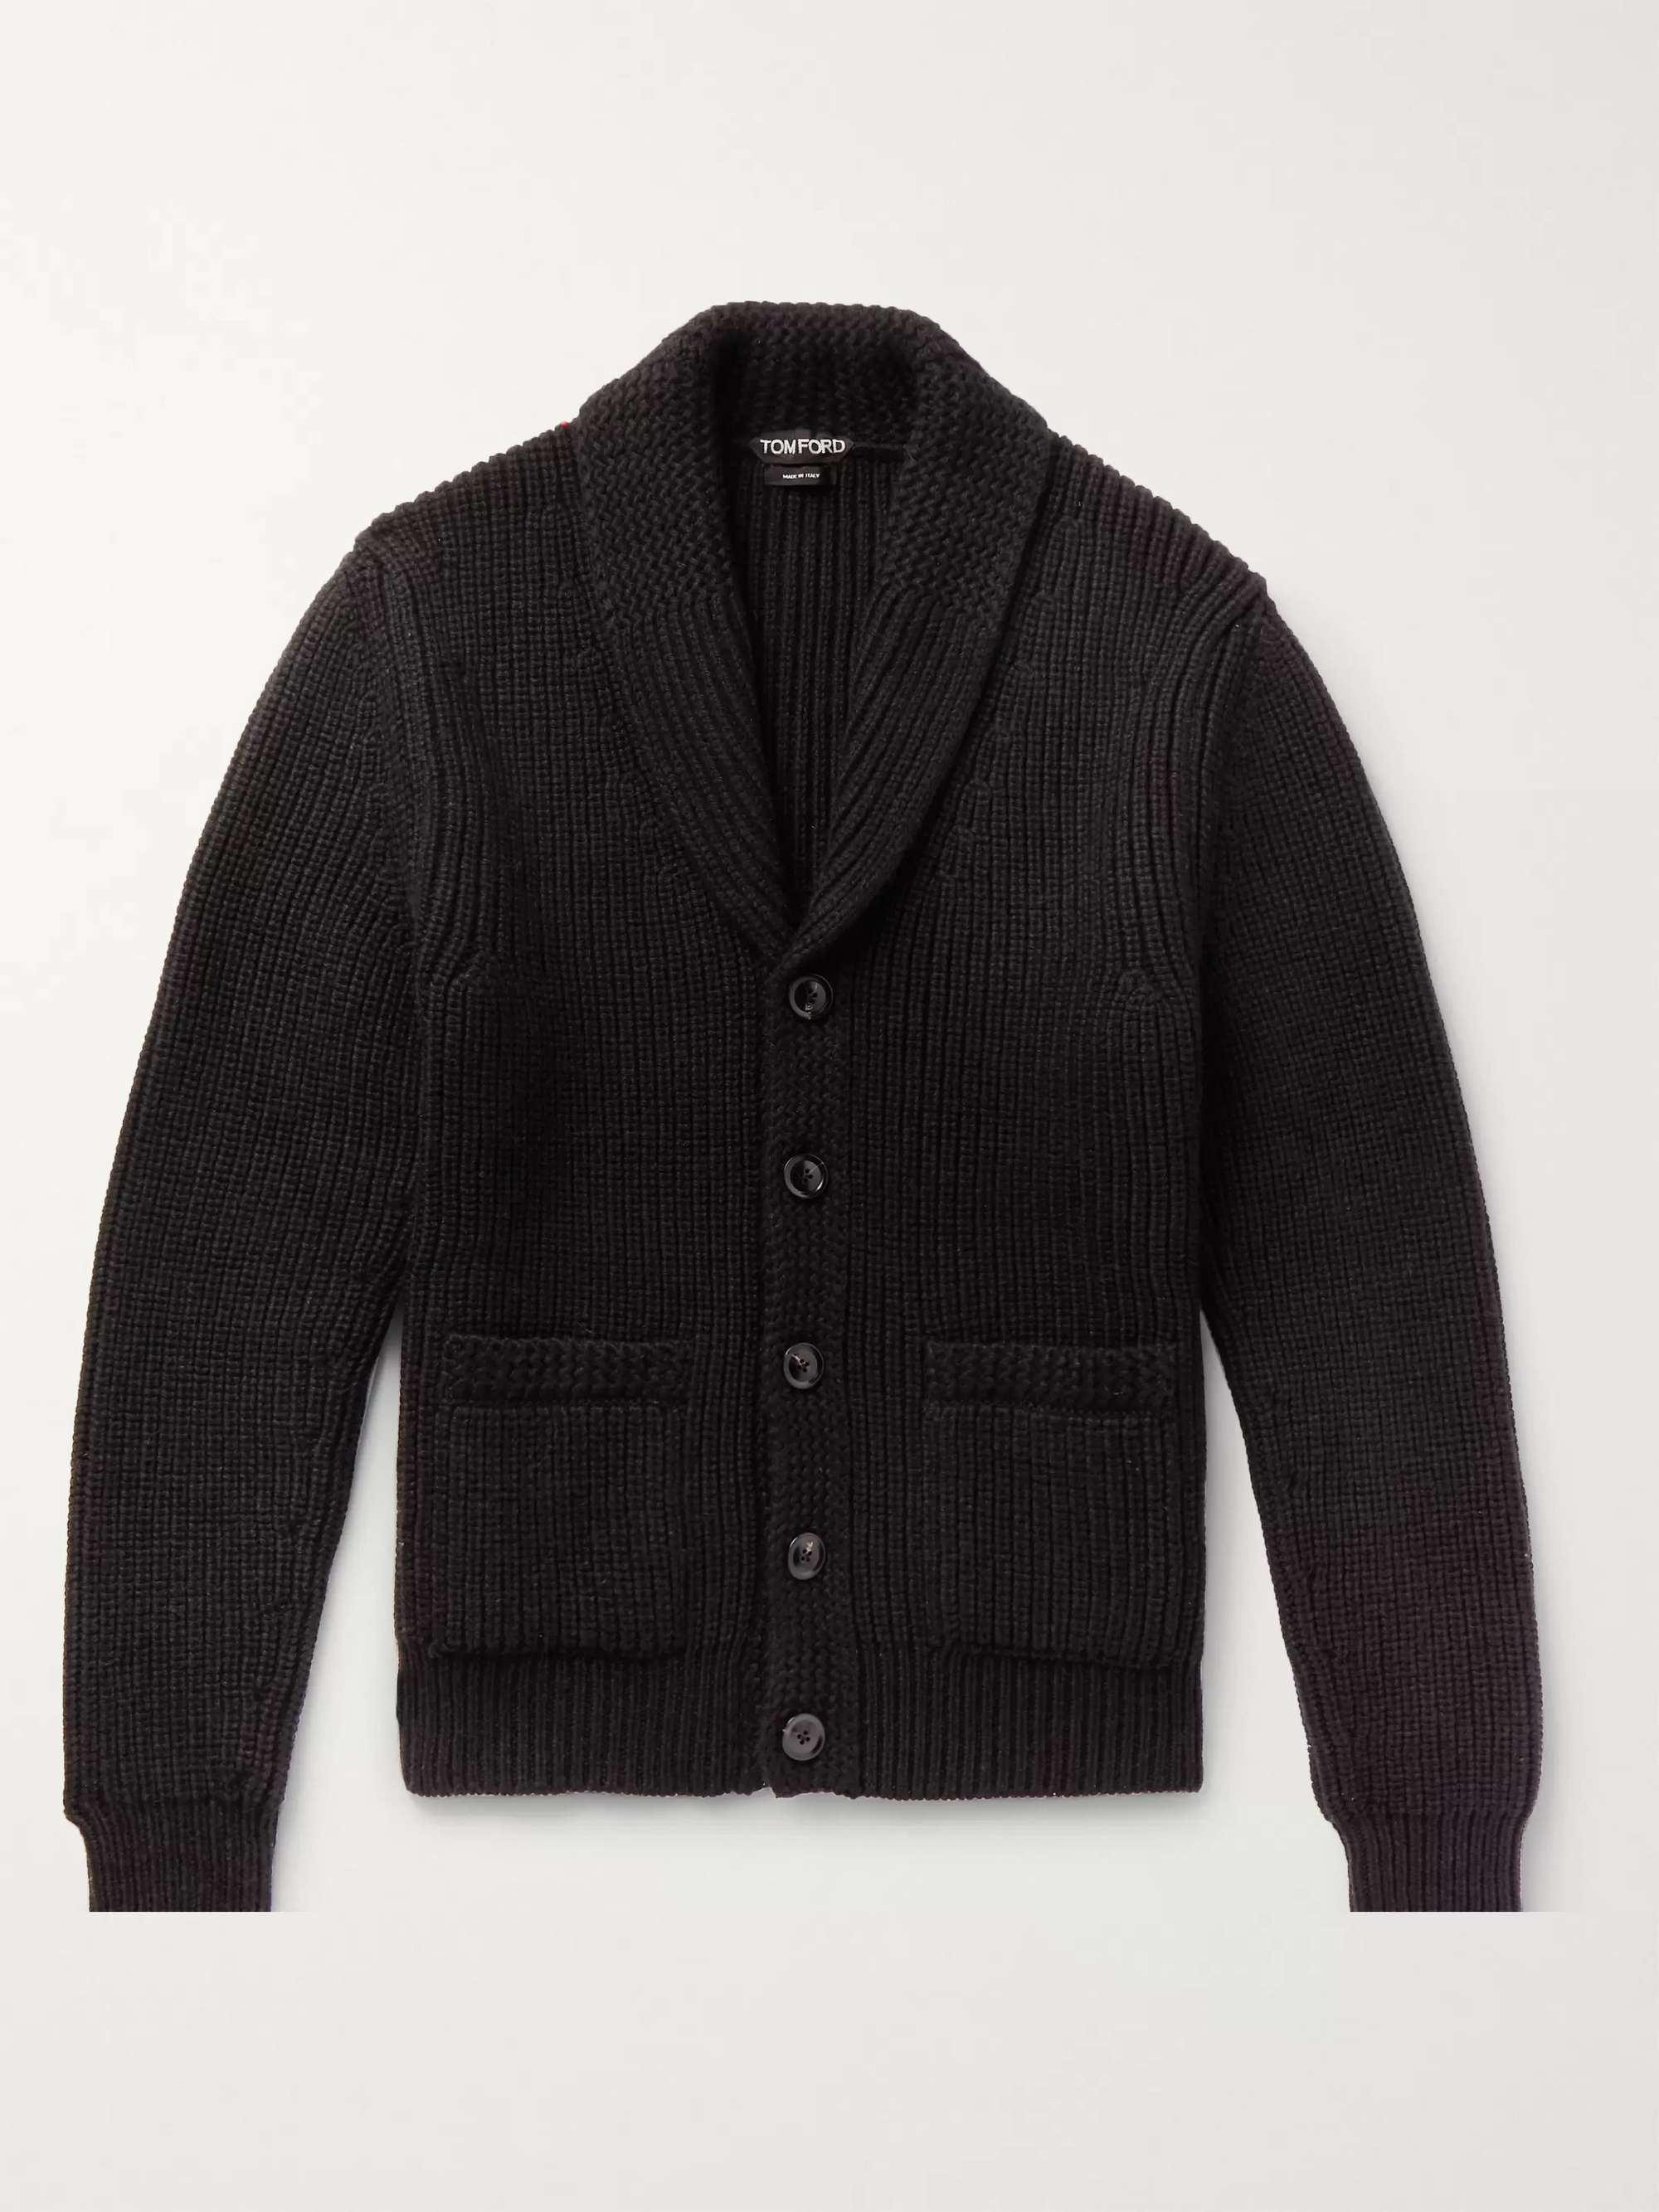 TOM FORD Shawl-Collar Cable-Knit Cashmere and Mohair-Blend Cardigan for Men  | MR PORTER